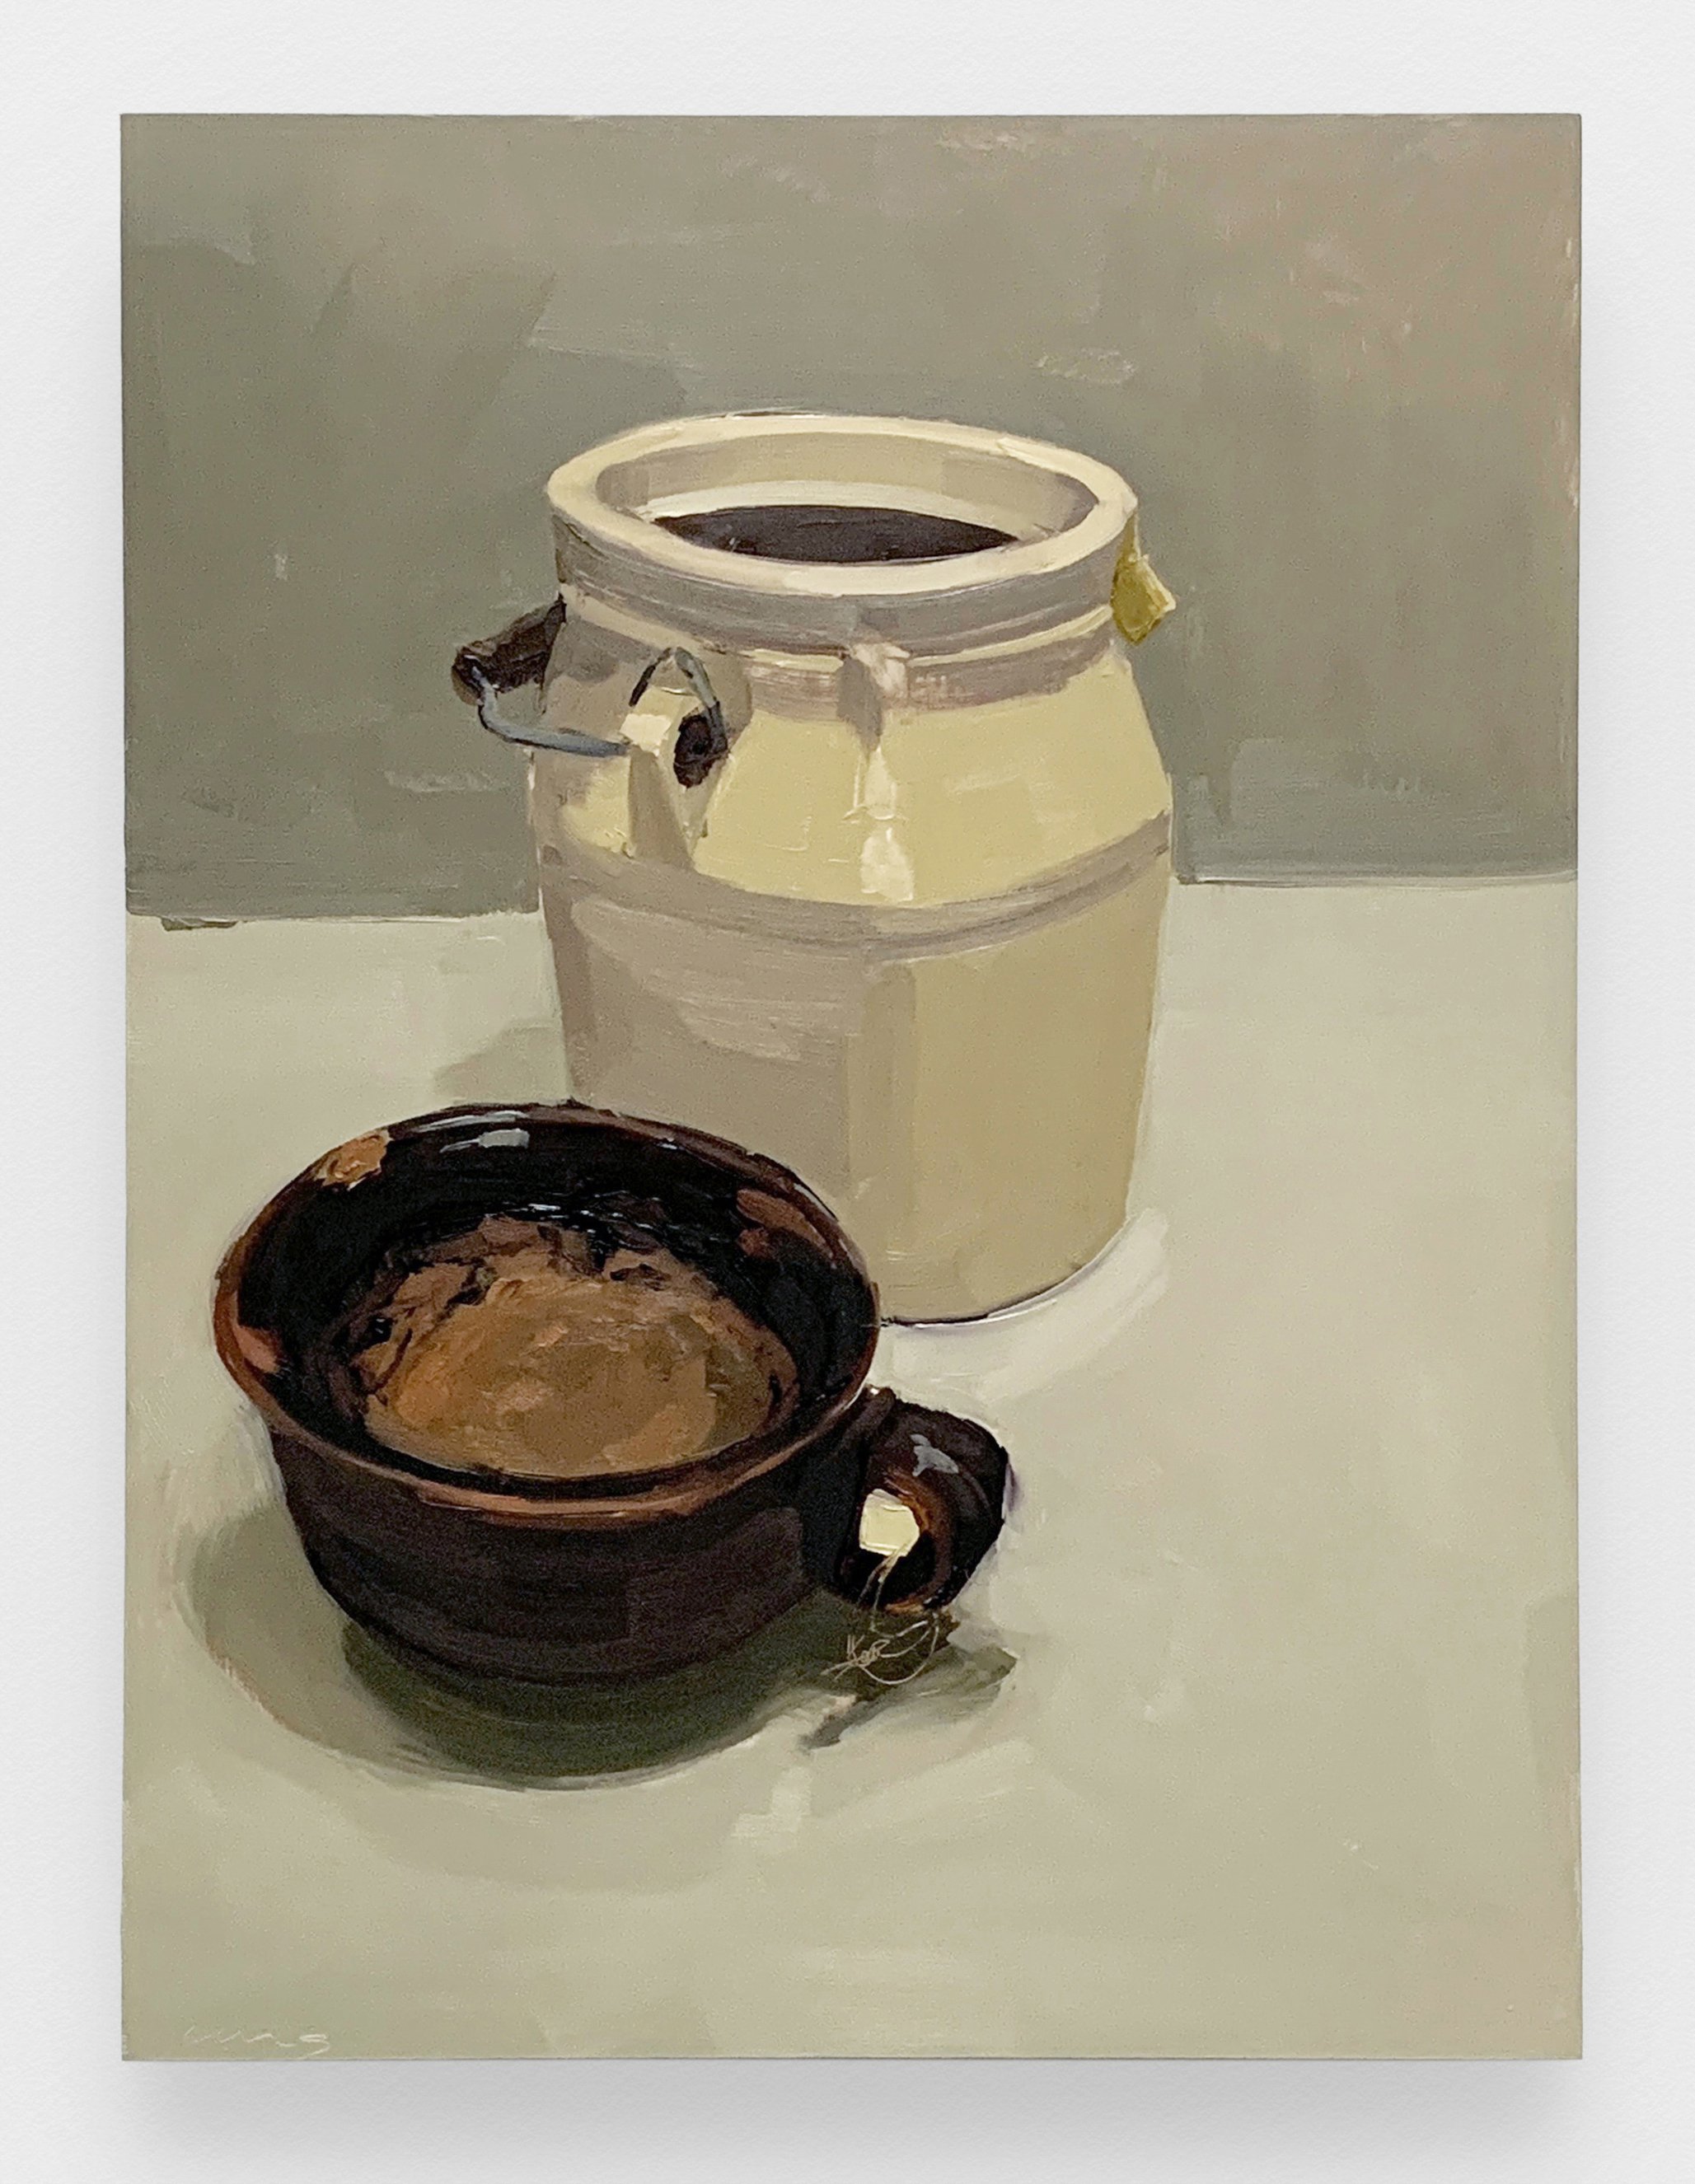  Carrie Mae Smith Small Crockery 2 2021 Oil on ACM panel (Aluminum Composite Material) 16h x 12w in 40.64h x 30.48w cm 